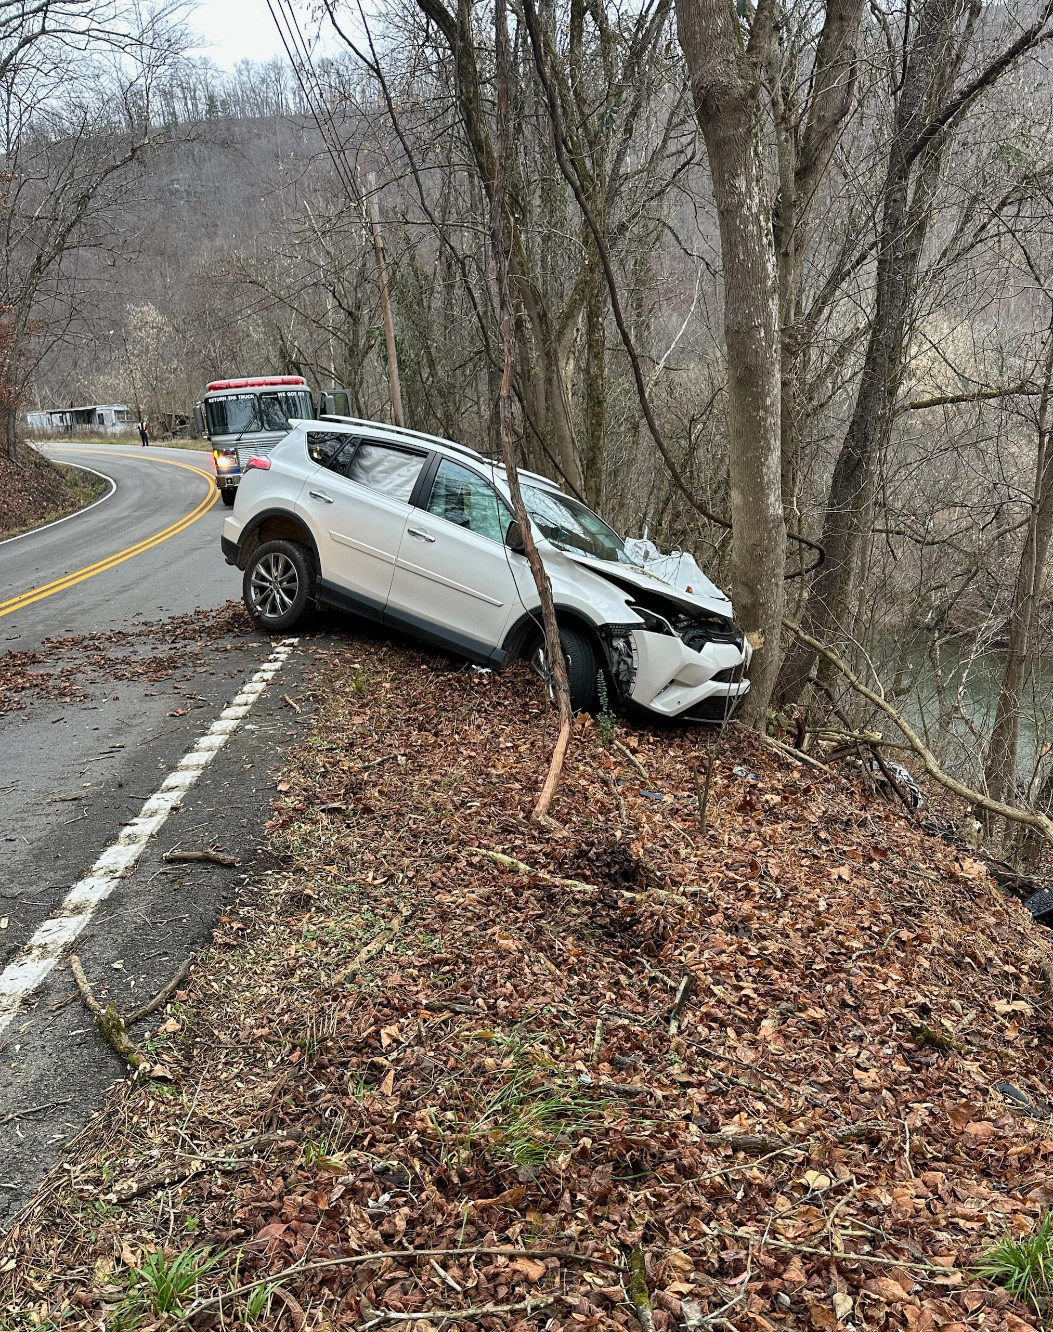 Single vehicle accident on Riverfront Road